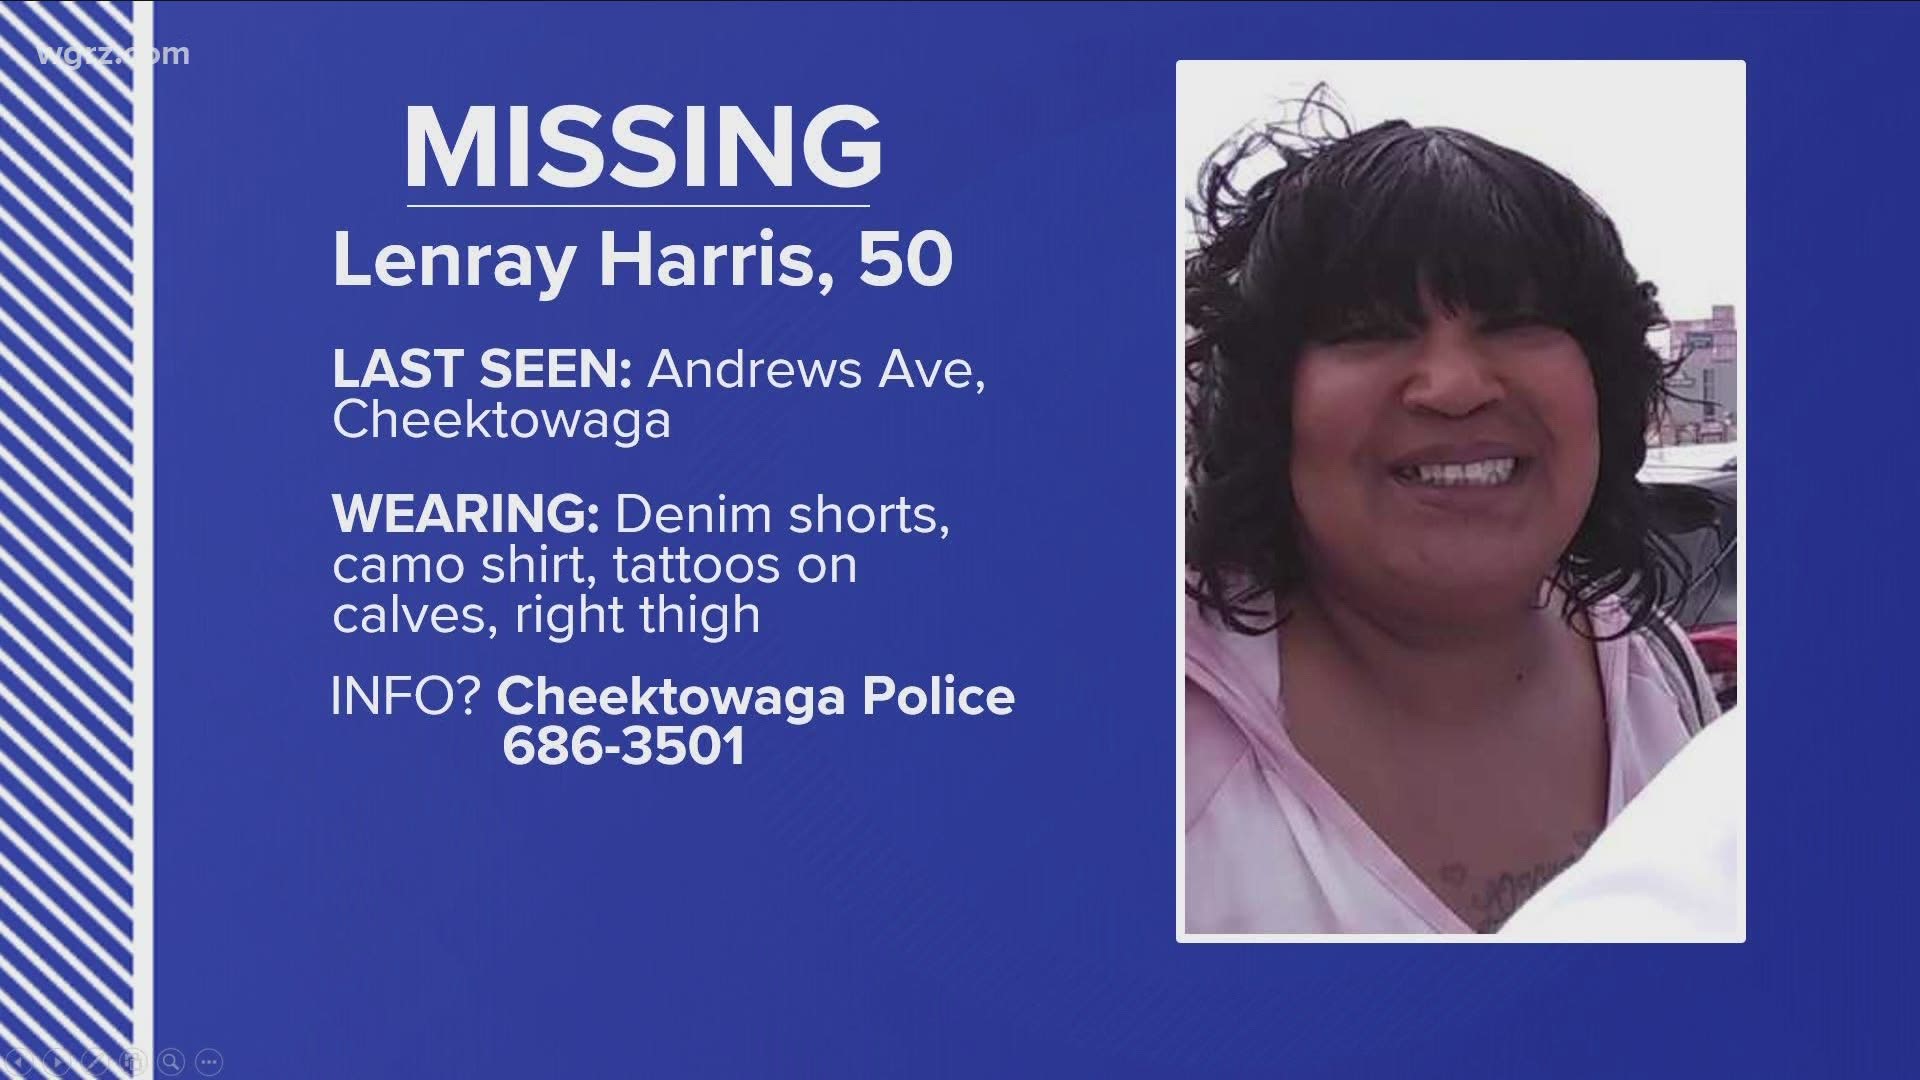 Harris was reported missing around 3 a.m. on June 18.